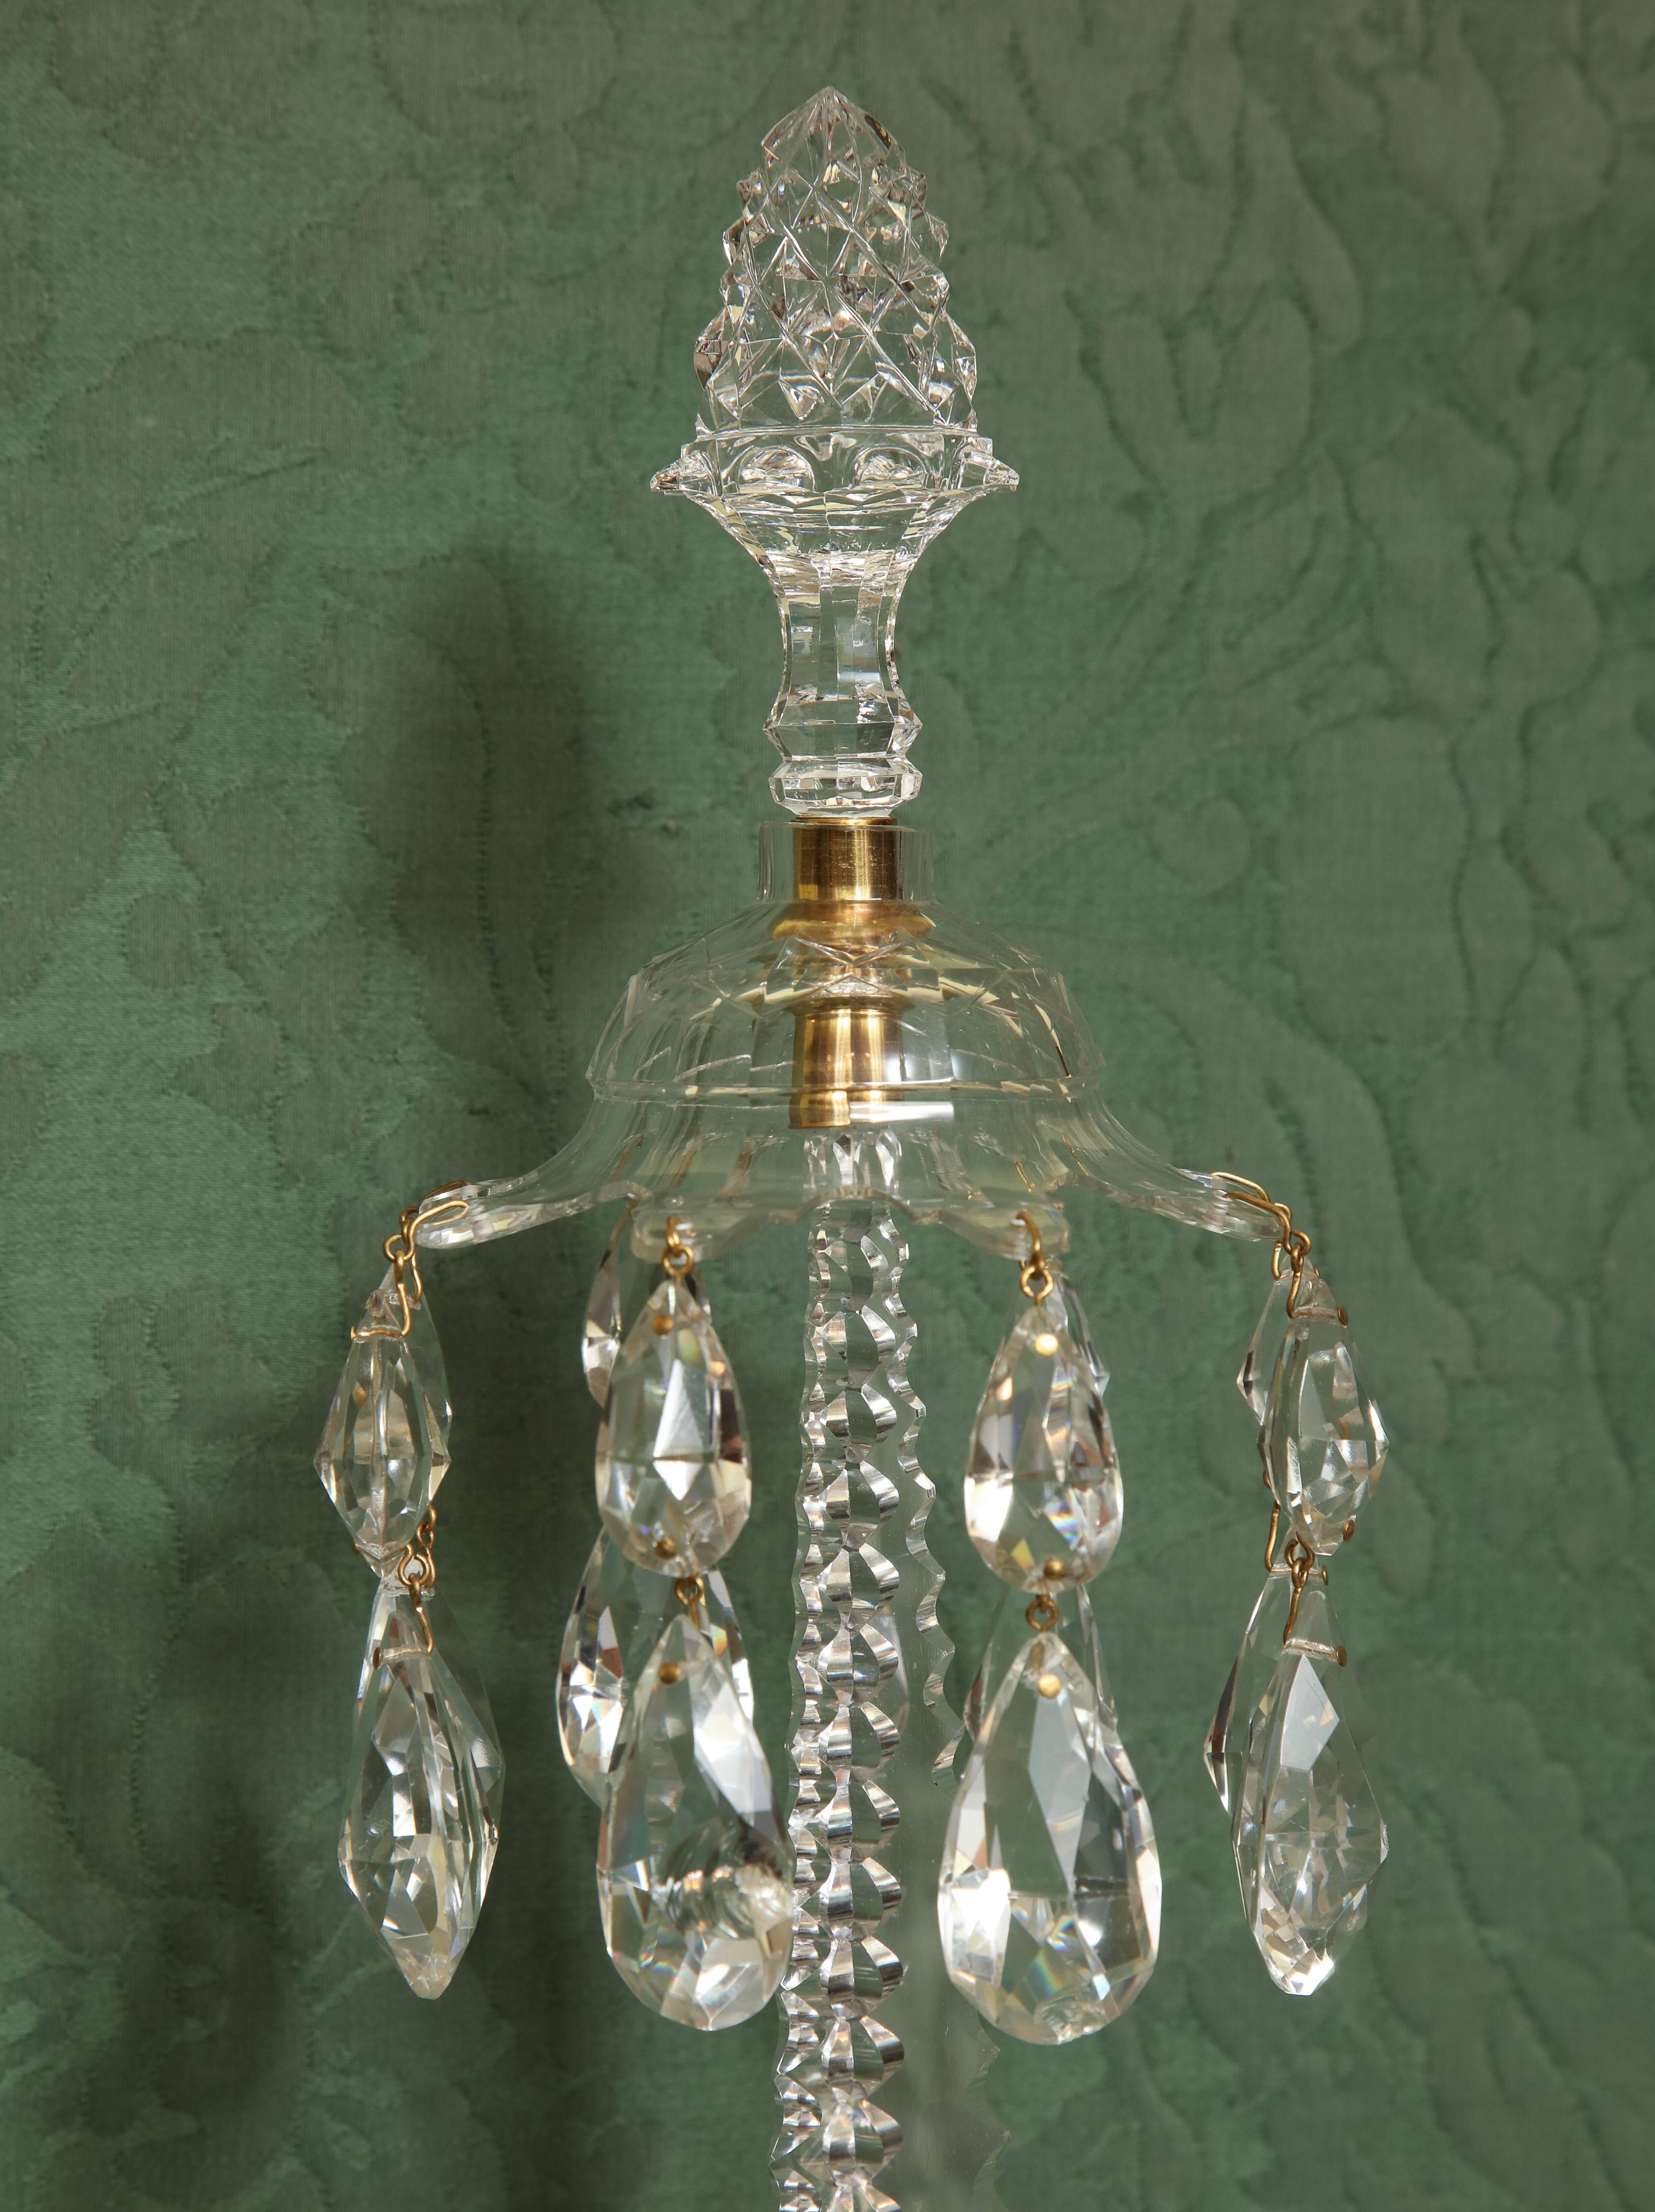 British Pair of Adam Cut Crystal and Ormolu Two-Light Wall Sconces, English, circa 1775 For Sale